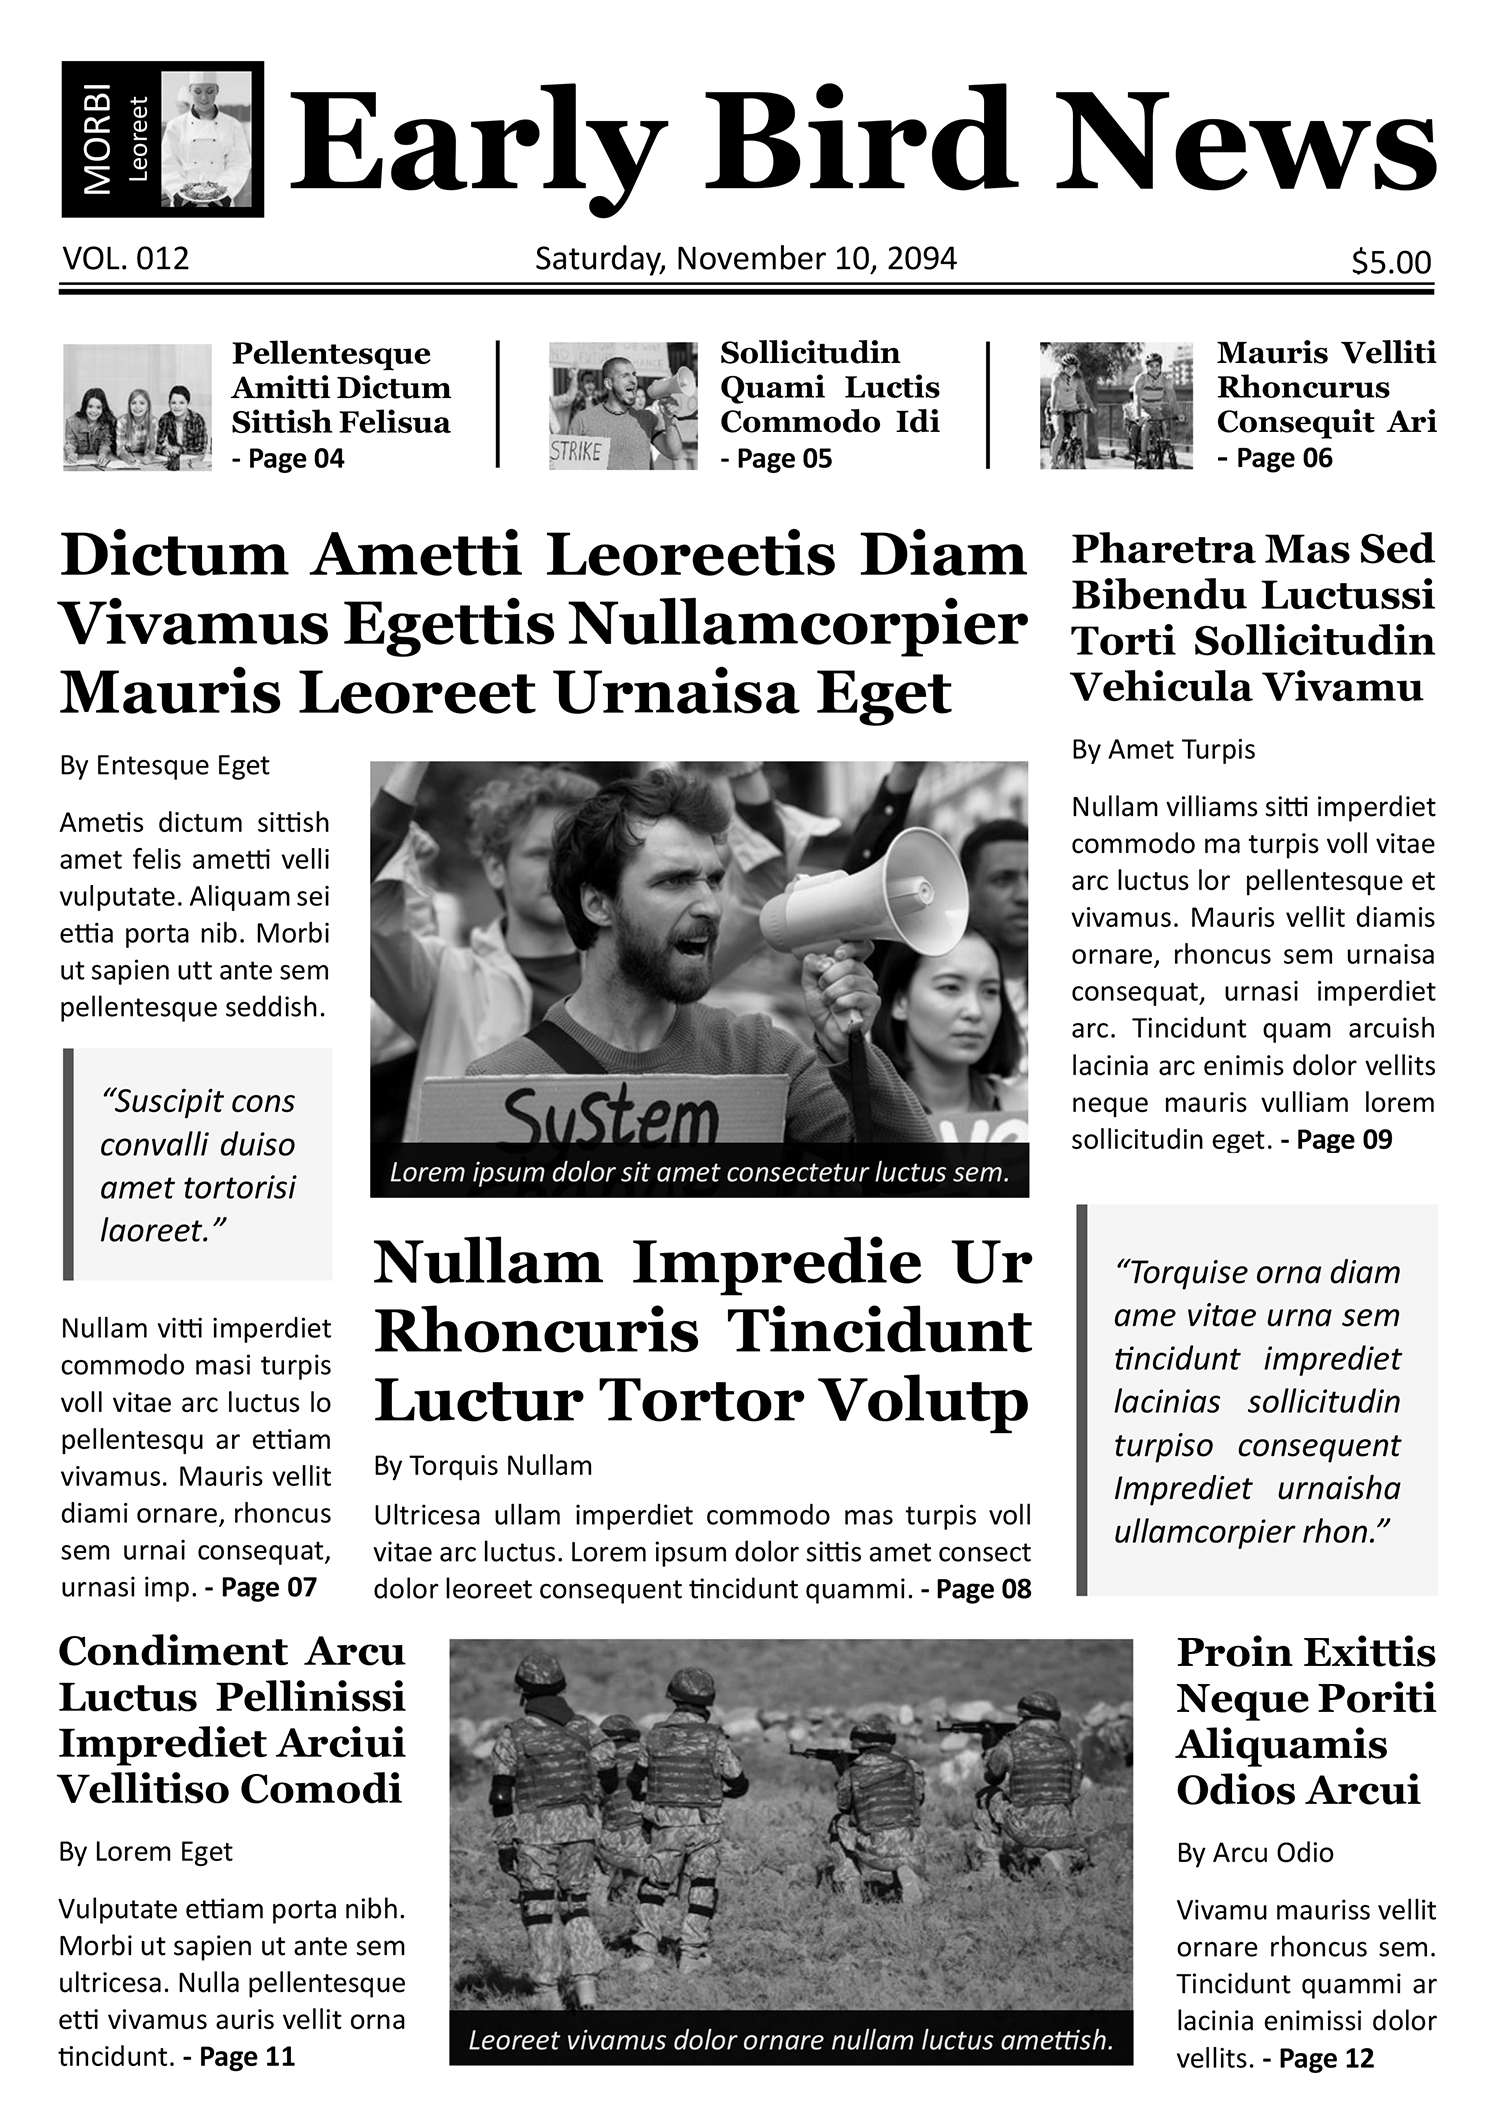 Black and White A4 Newspaper Front Page Template - Page 01